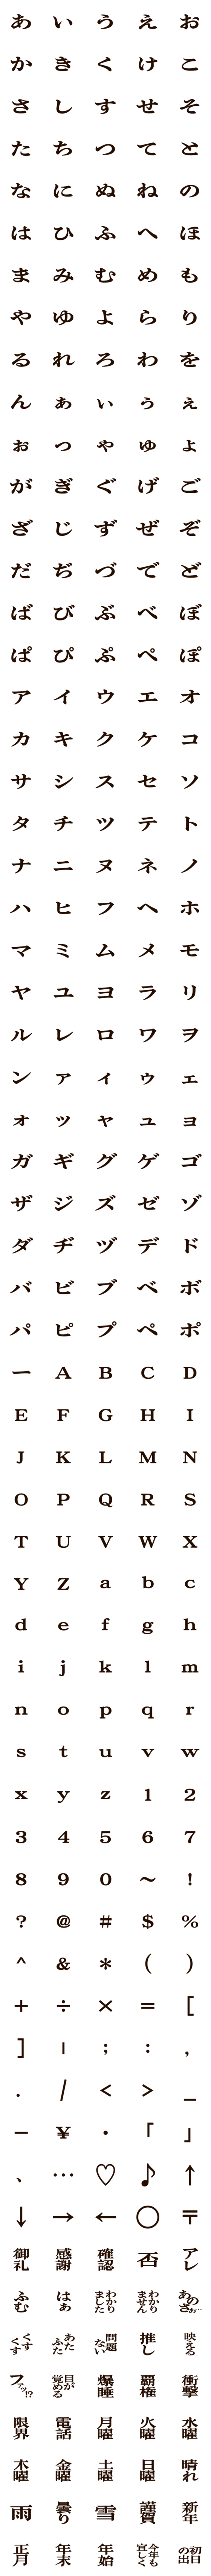 [LINE絵文字]DF古籍黒檀B フォント絵文字の画像一覧